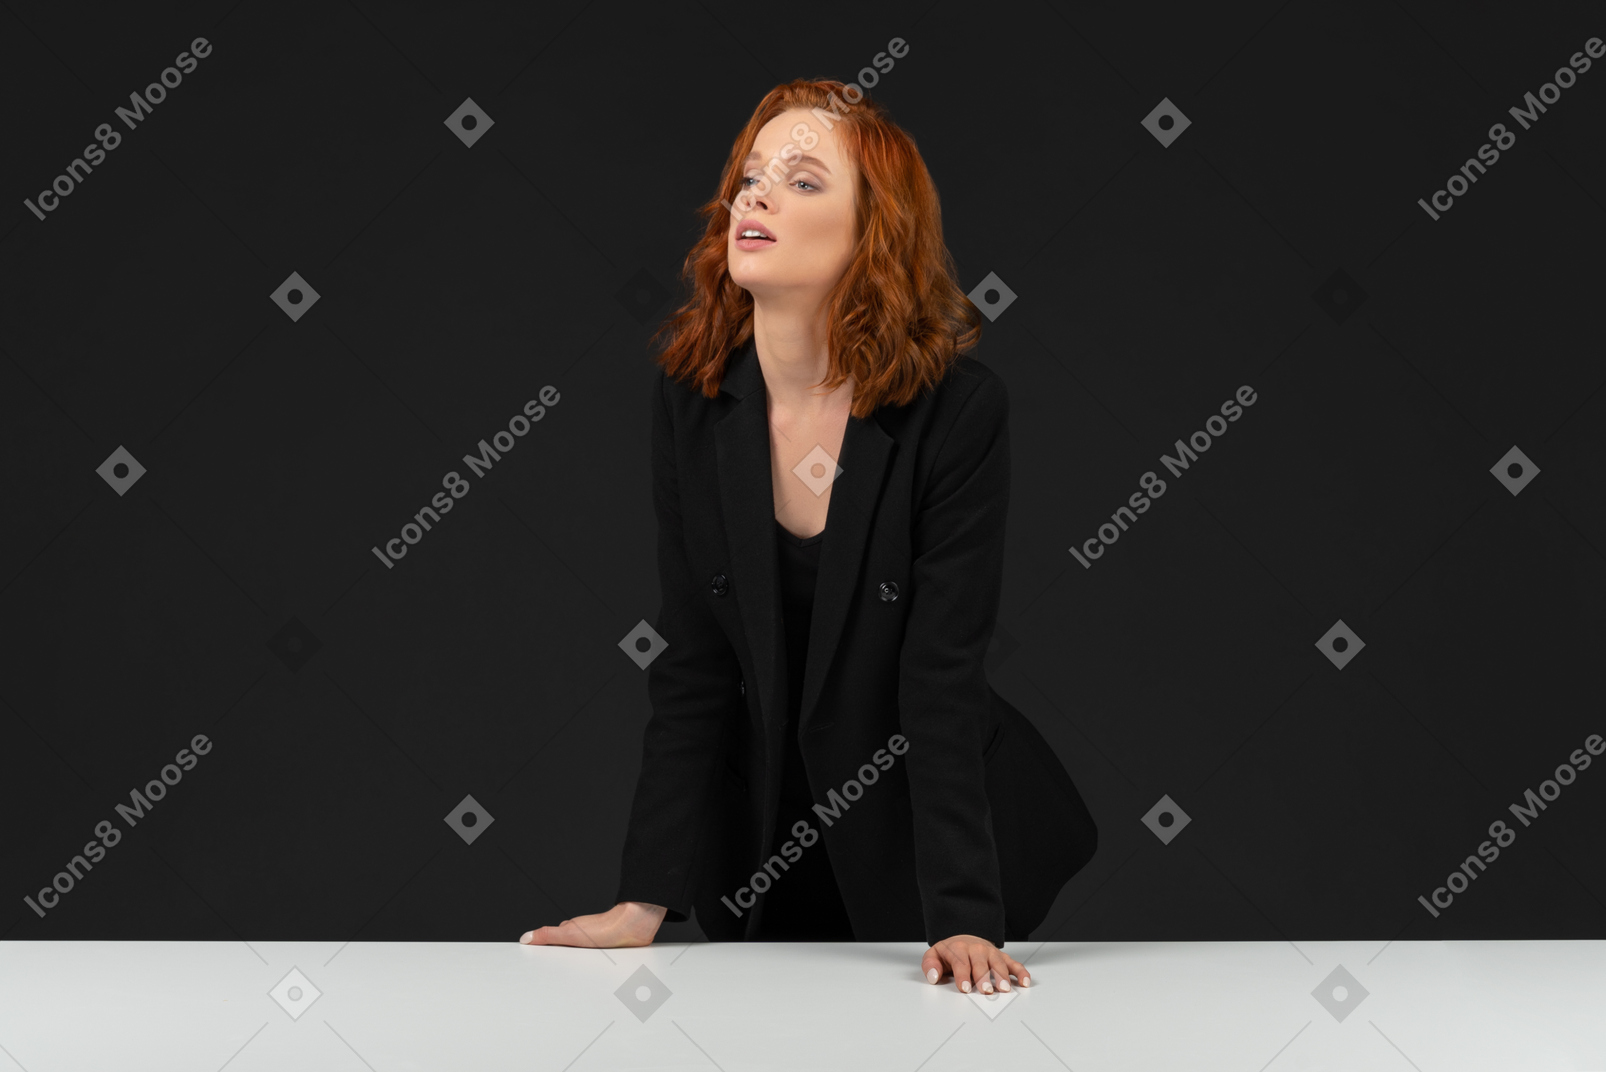 A frontal view of the beautiful younf womanstanding at the table